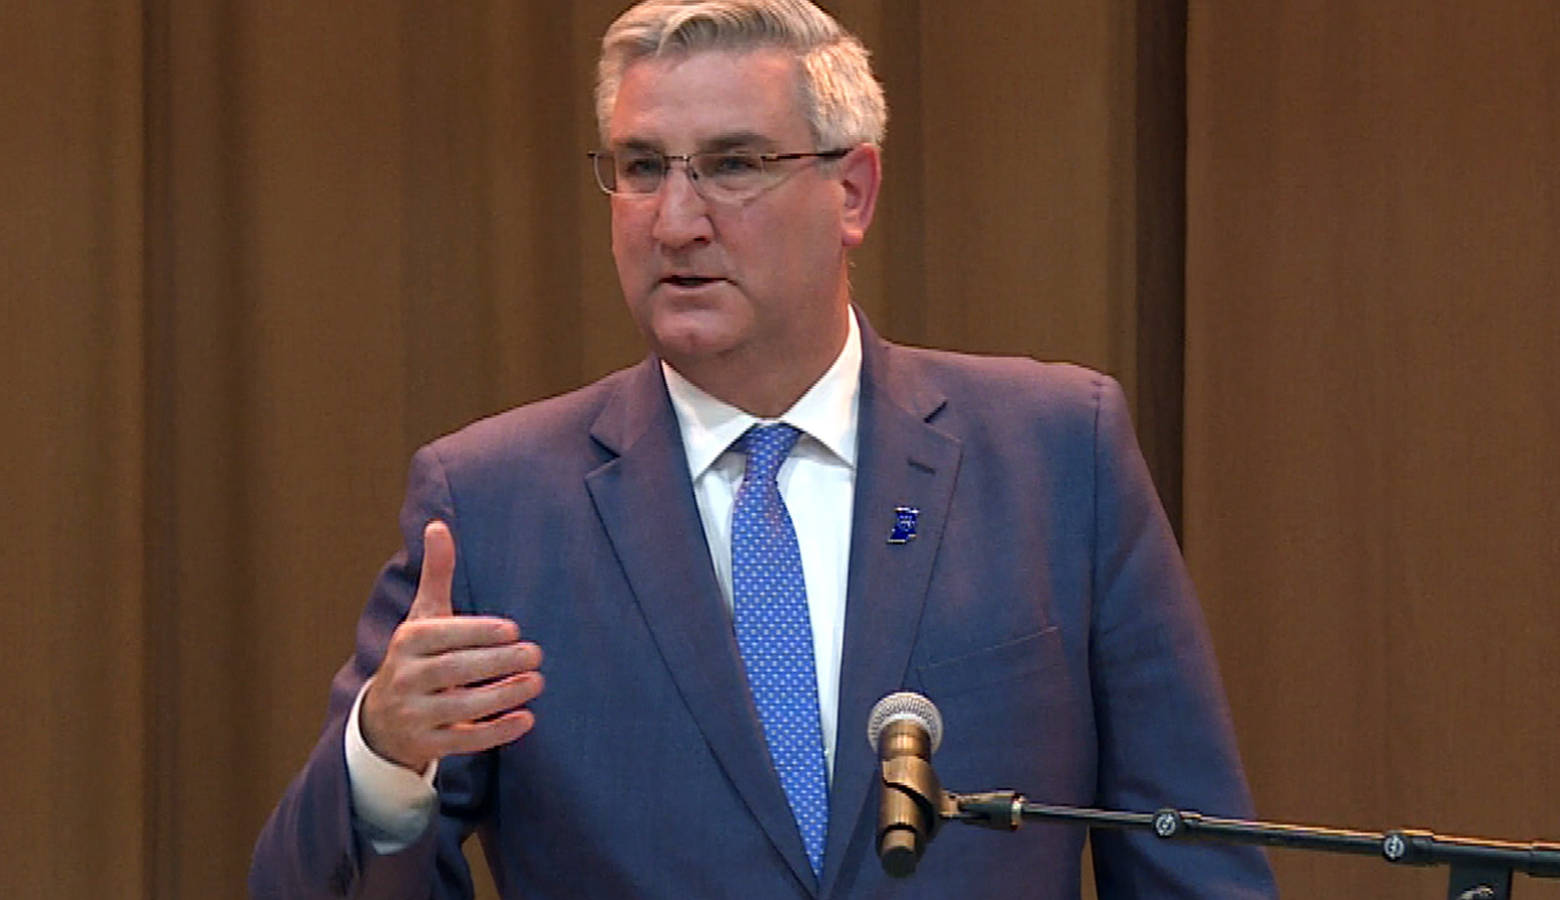 Gov. Eric Holcomb says his 2019 agenda will tackle ncludes infant mortality, prenatal substance use and child welfare reform. (Zach Herndon/WTIU)